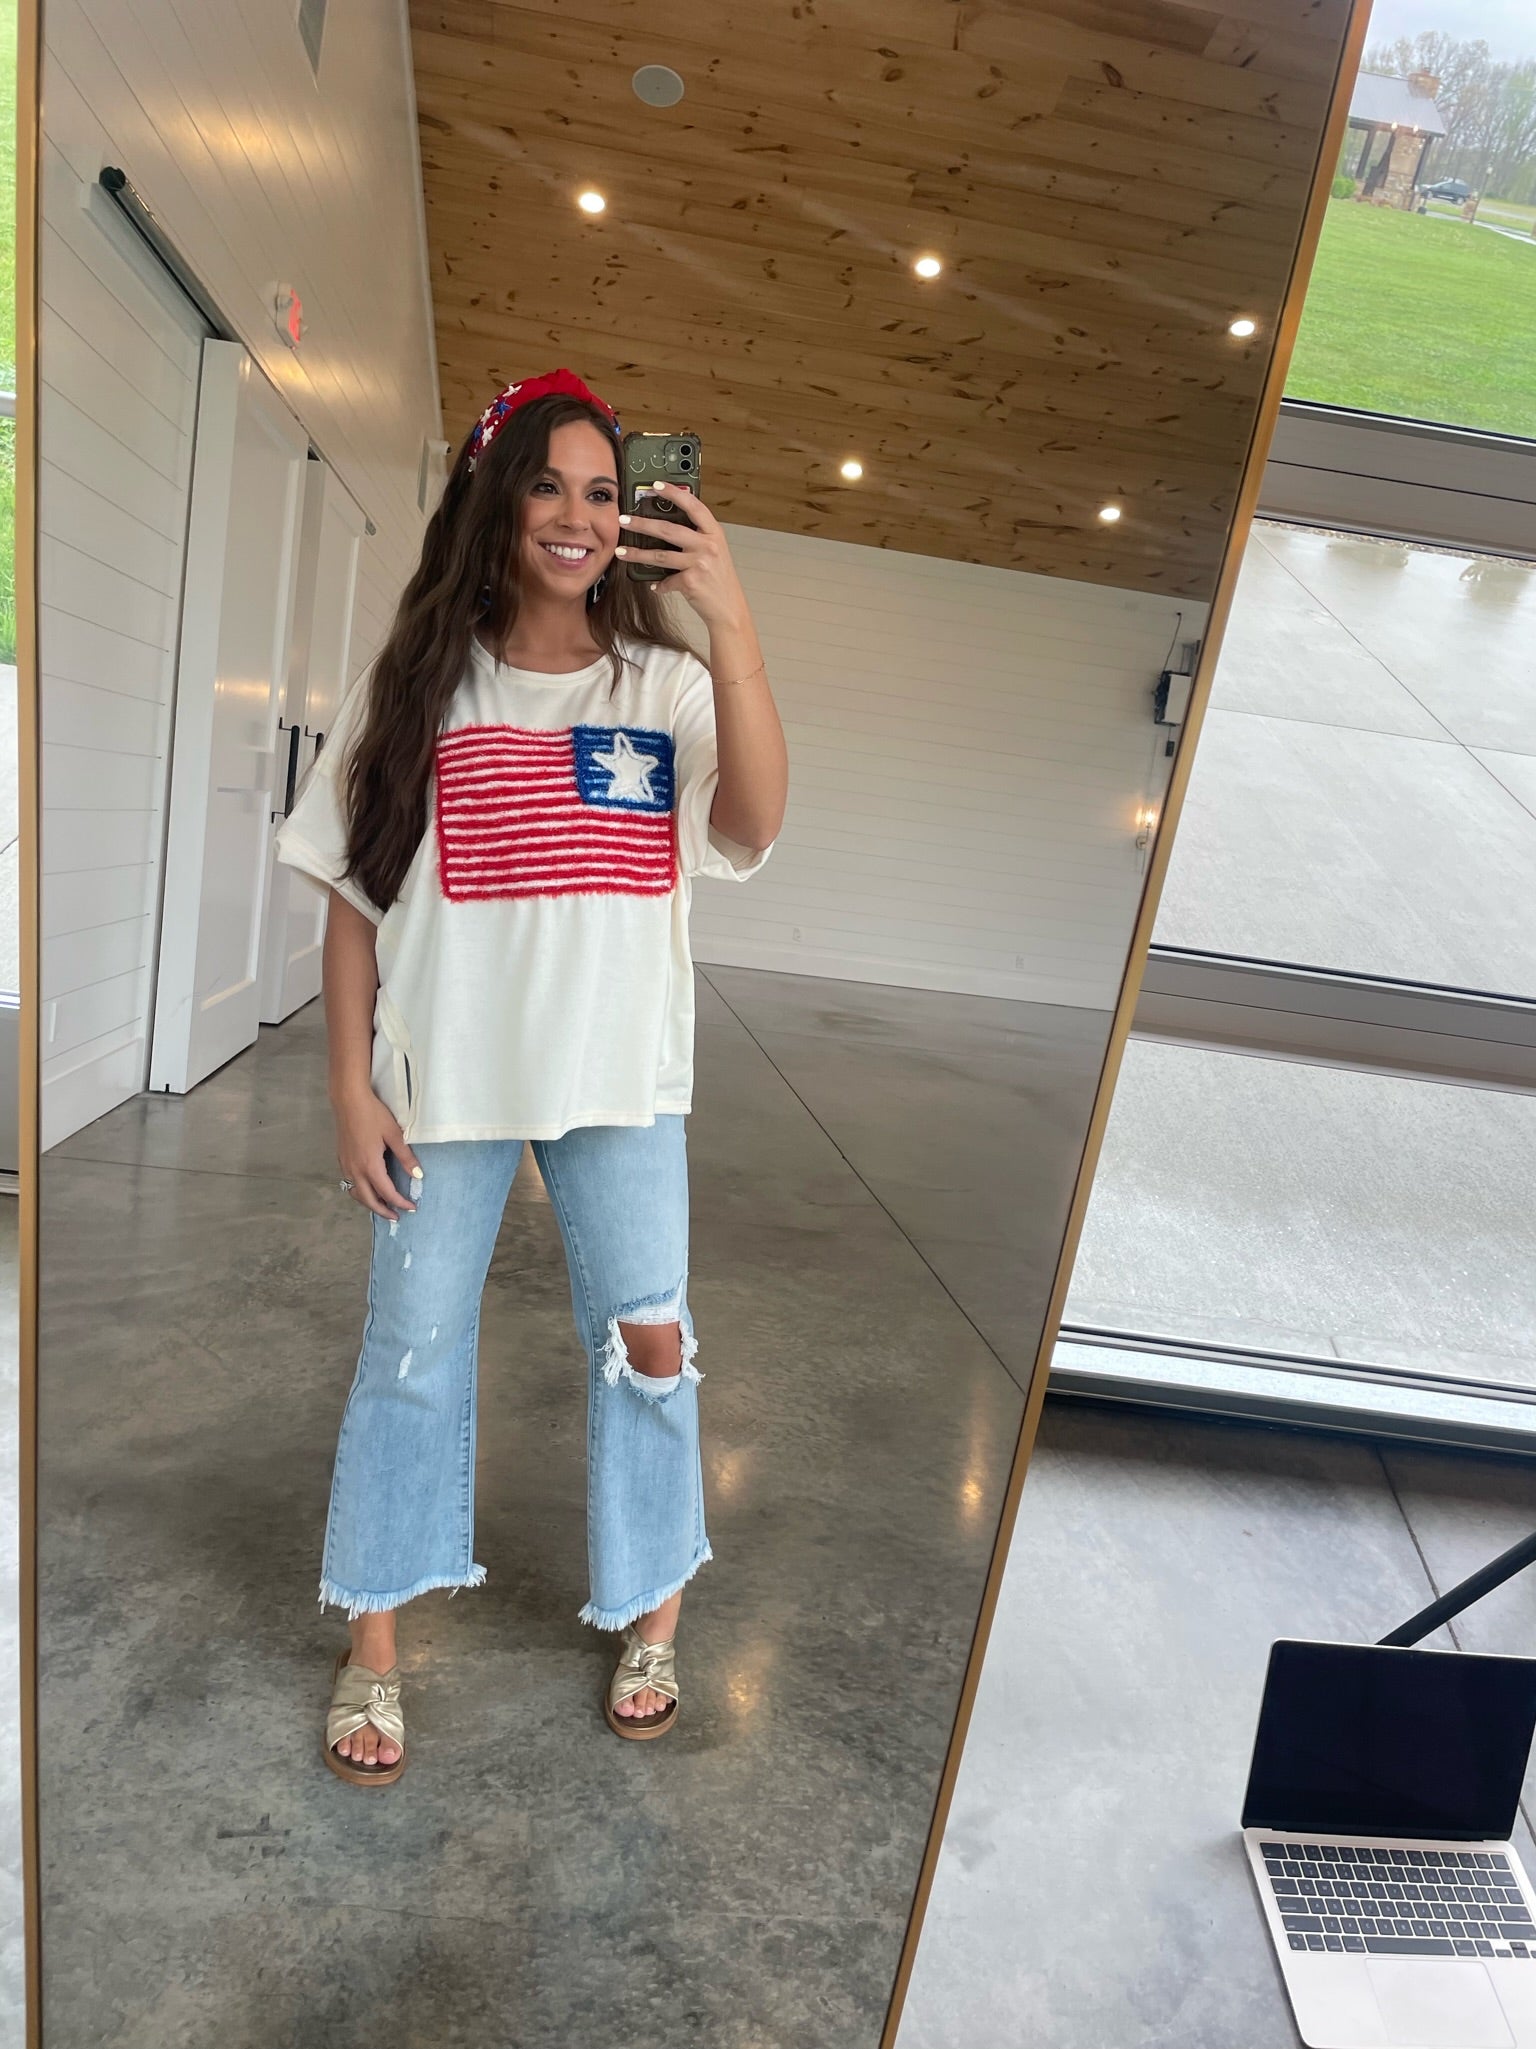 The Red, White & Blue Top FINAL SALE